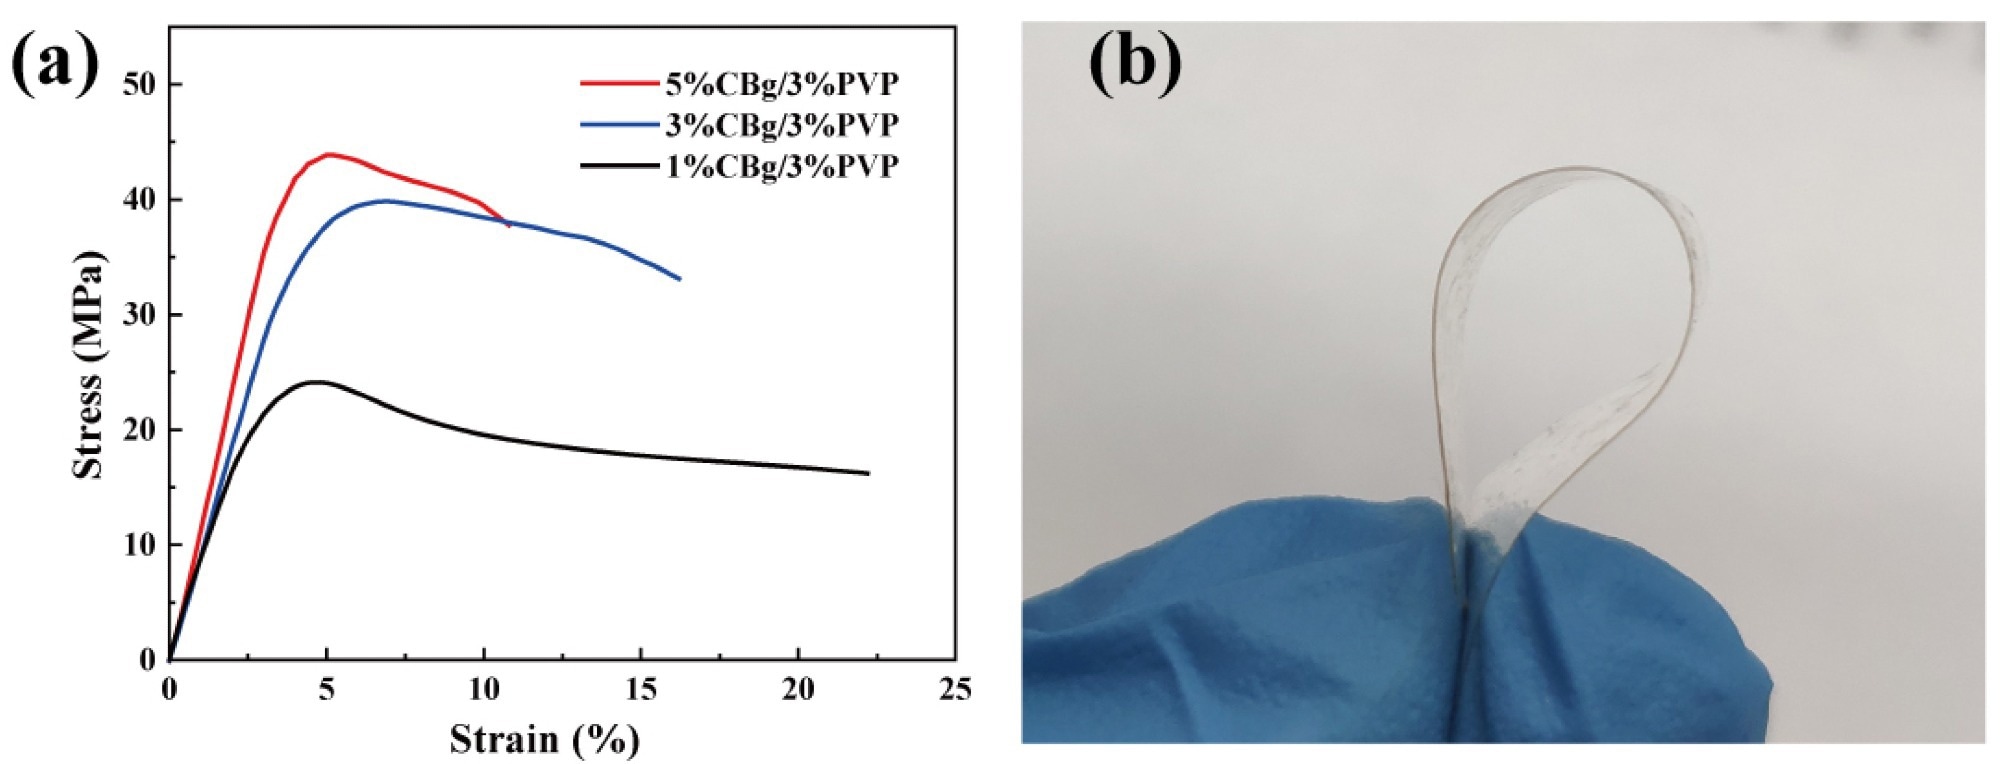 (a) Tensile testing of CBg/PVP films with different mass concentrations. (b) Photograph of 3% CBg/3% PVP film.